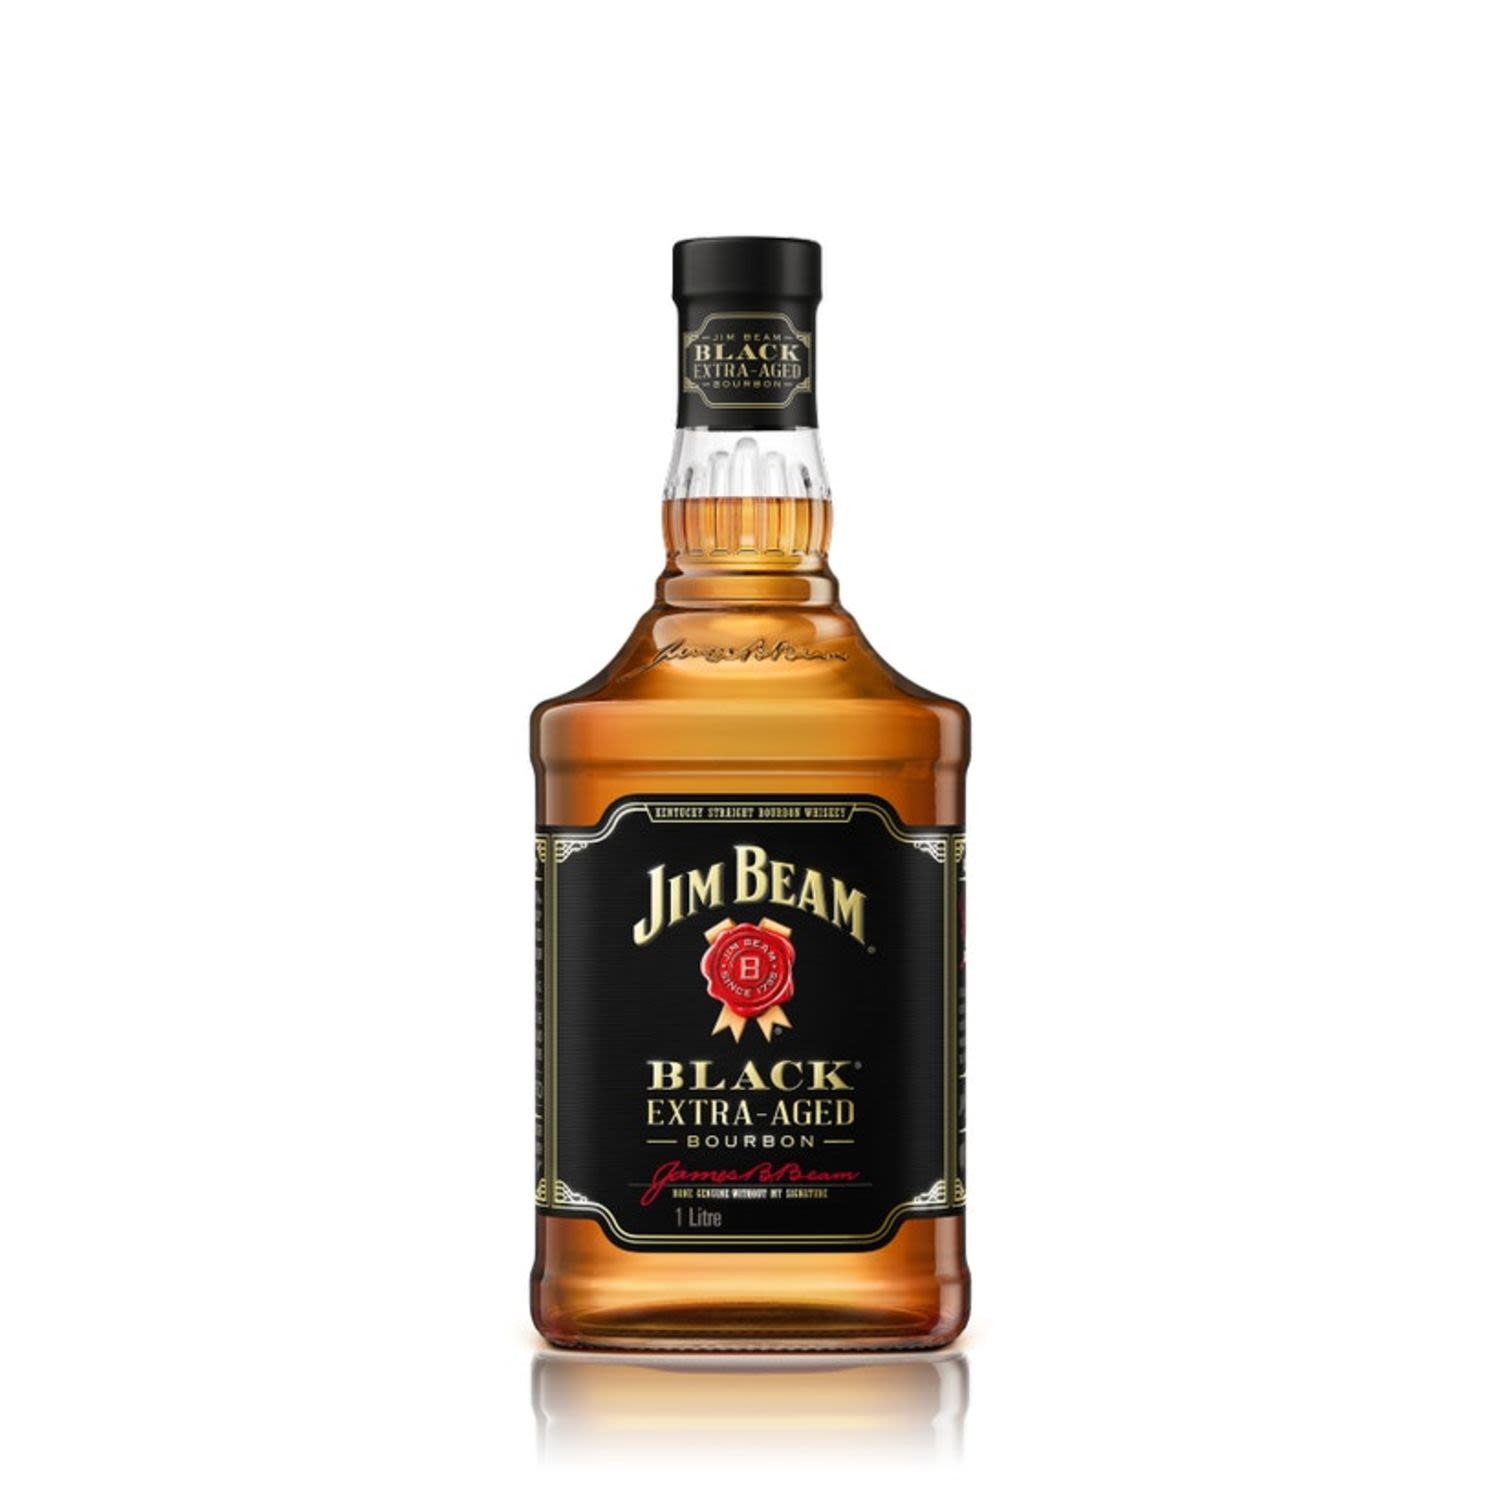 Our premium, 86-proof bourbon whiskey spends years longer being aged in our American White Oak barrels than our original Jim Beam. It’s those extra years of aging that give Jim Beam Black its full-bodied flavour with notes of smooth caramel and warm oak. The result is a full-bodied bourbon with an extra level of elegance and refinement that's meant to be sipped and savoured.<br /> <br />Alcohol Volume: 40.00%<br /><br />Pack Format: 6 Pack<br /><br />Standard Drinks: 31.6</br /><br />Pack Type: Bottle<br /><br />Country of Origin: USA<br />